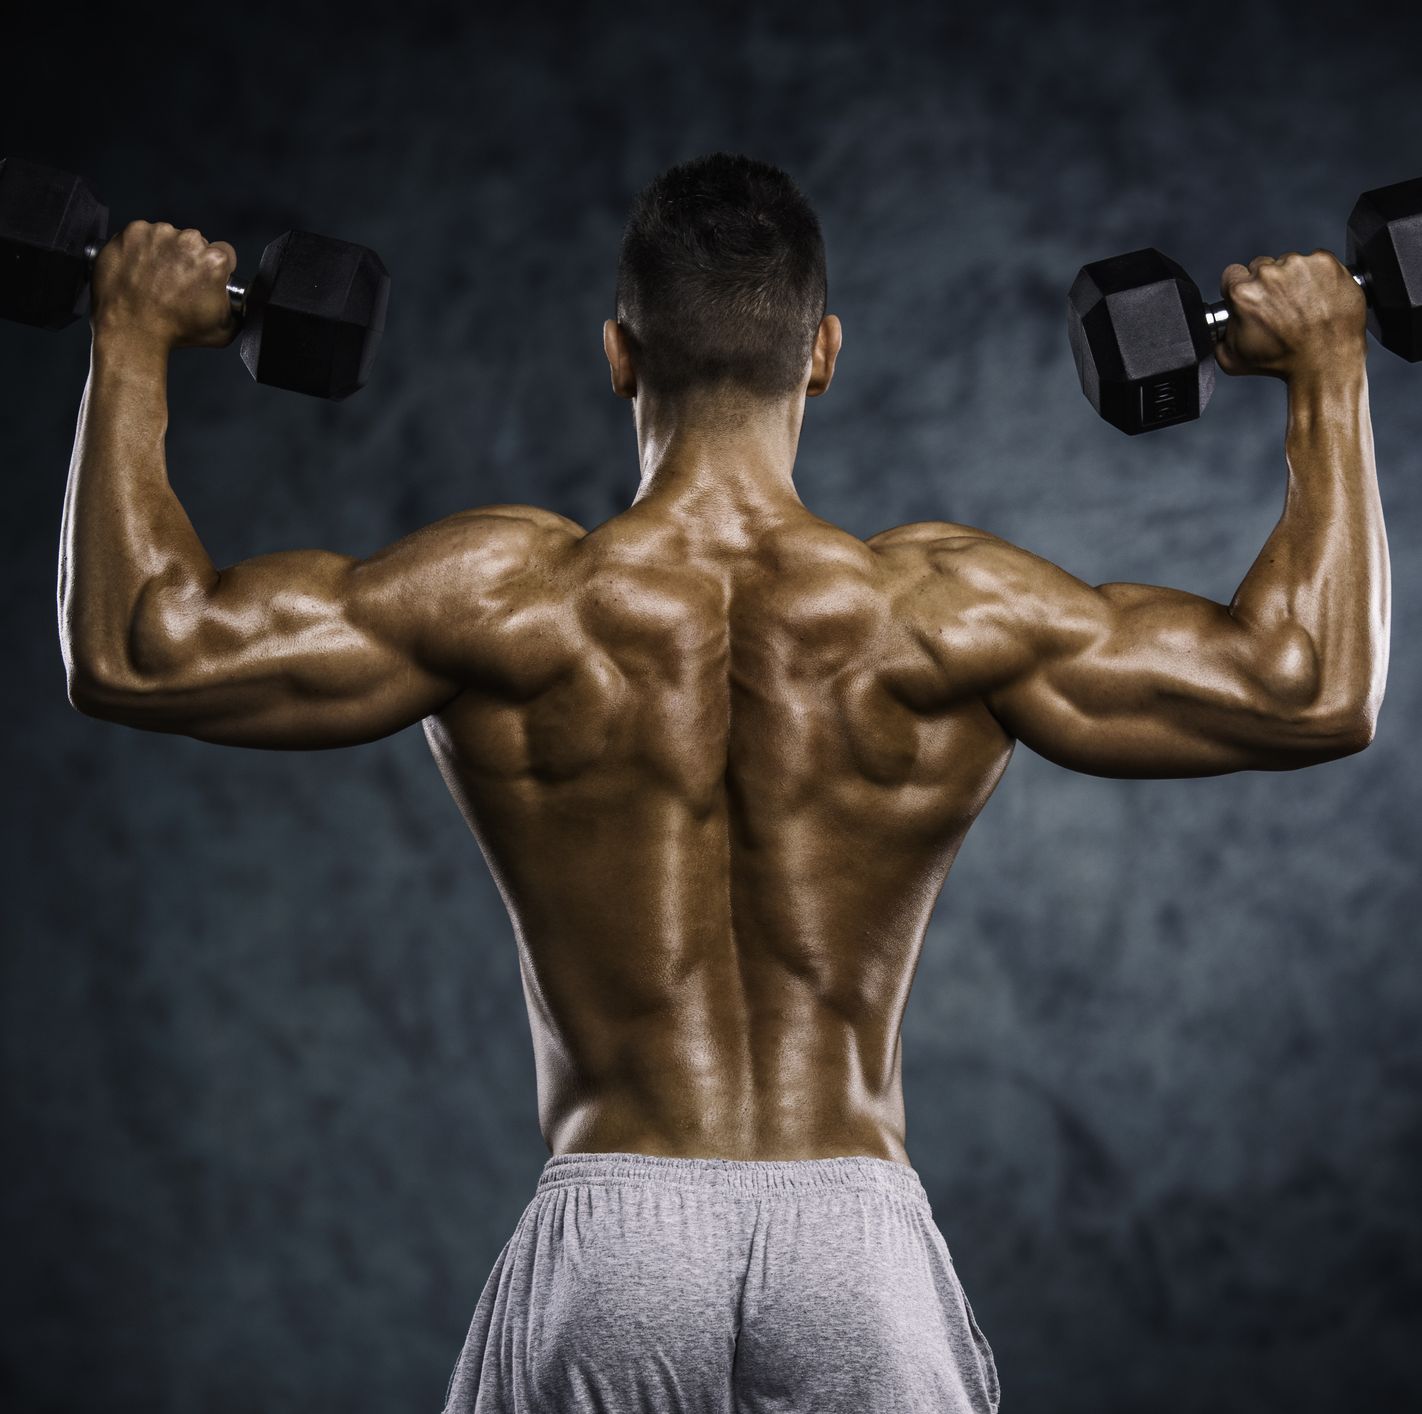 15 Moves to Smoke Your Back Using Dumbbells